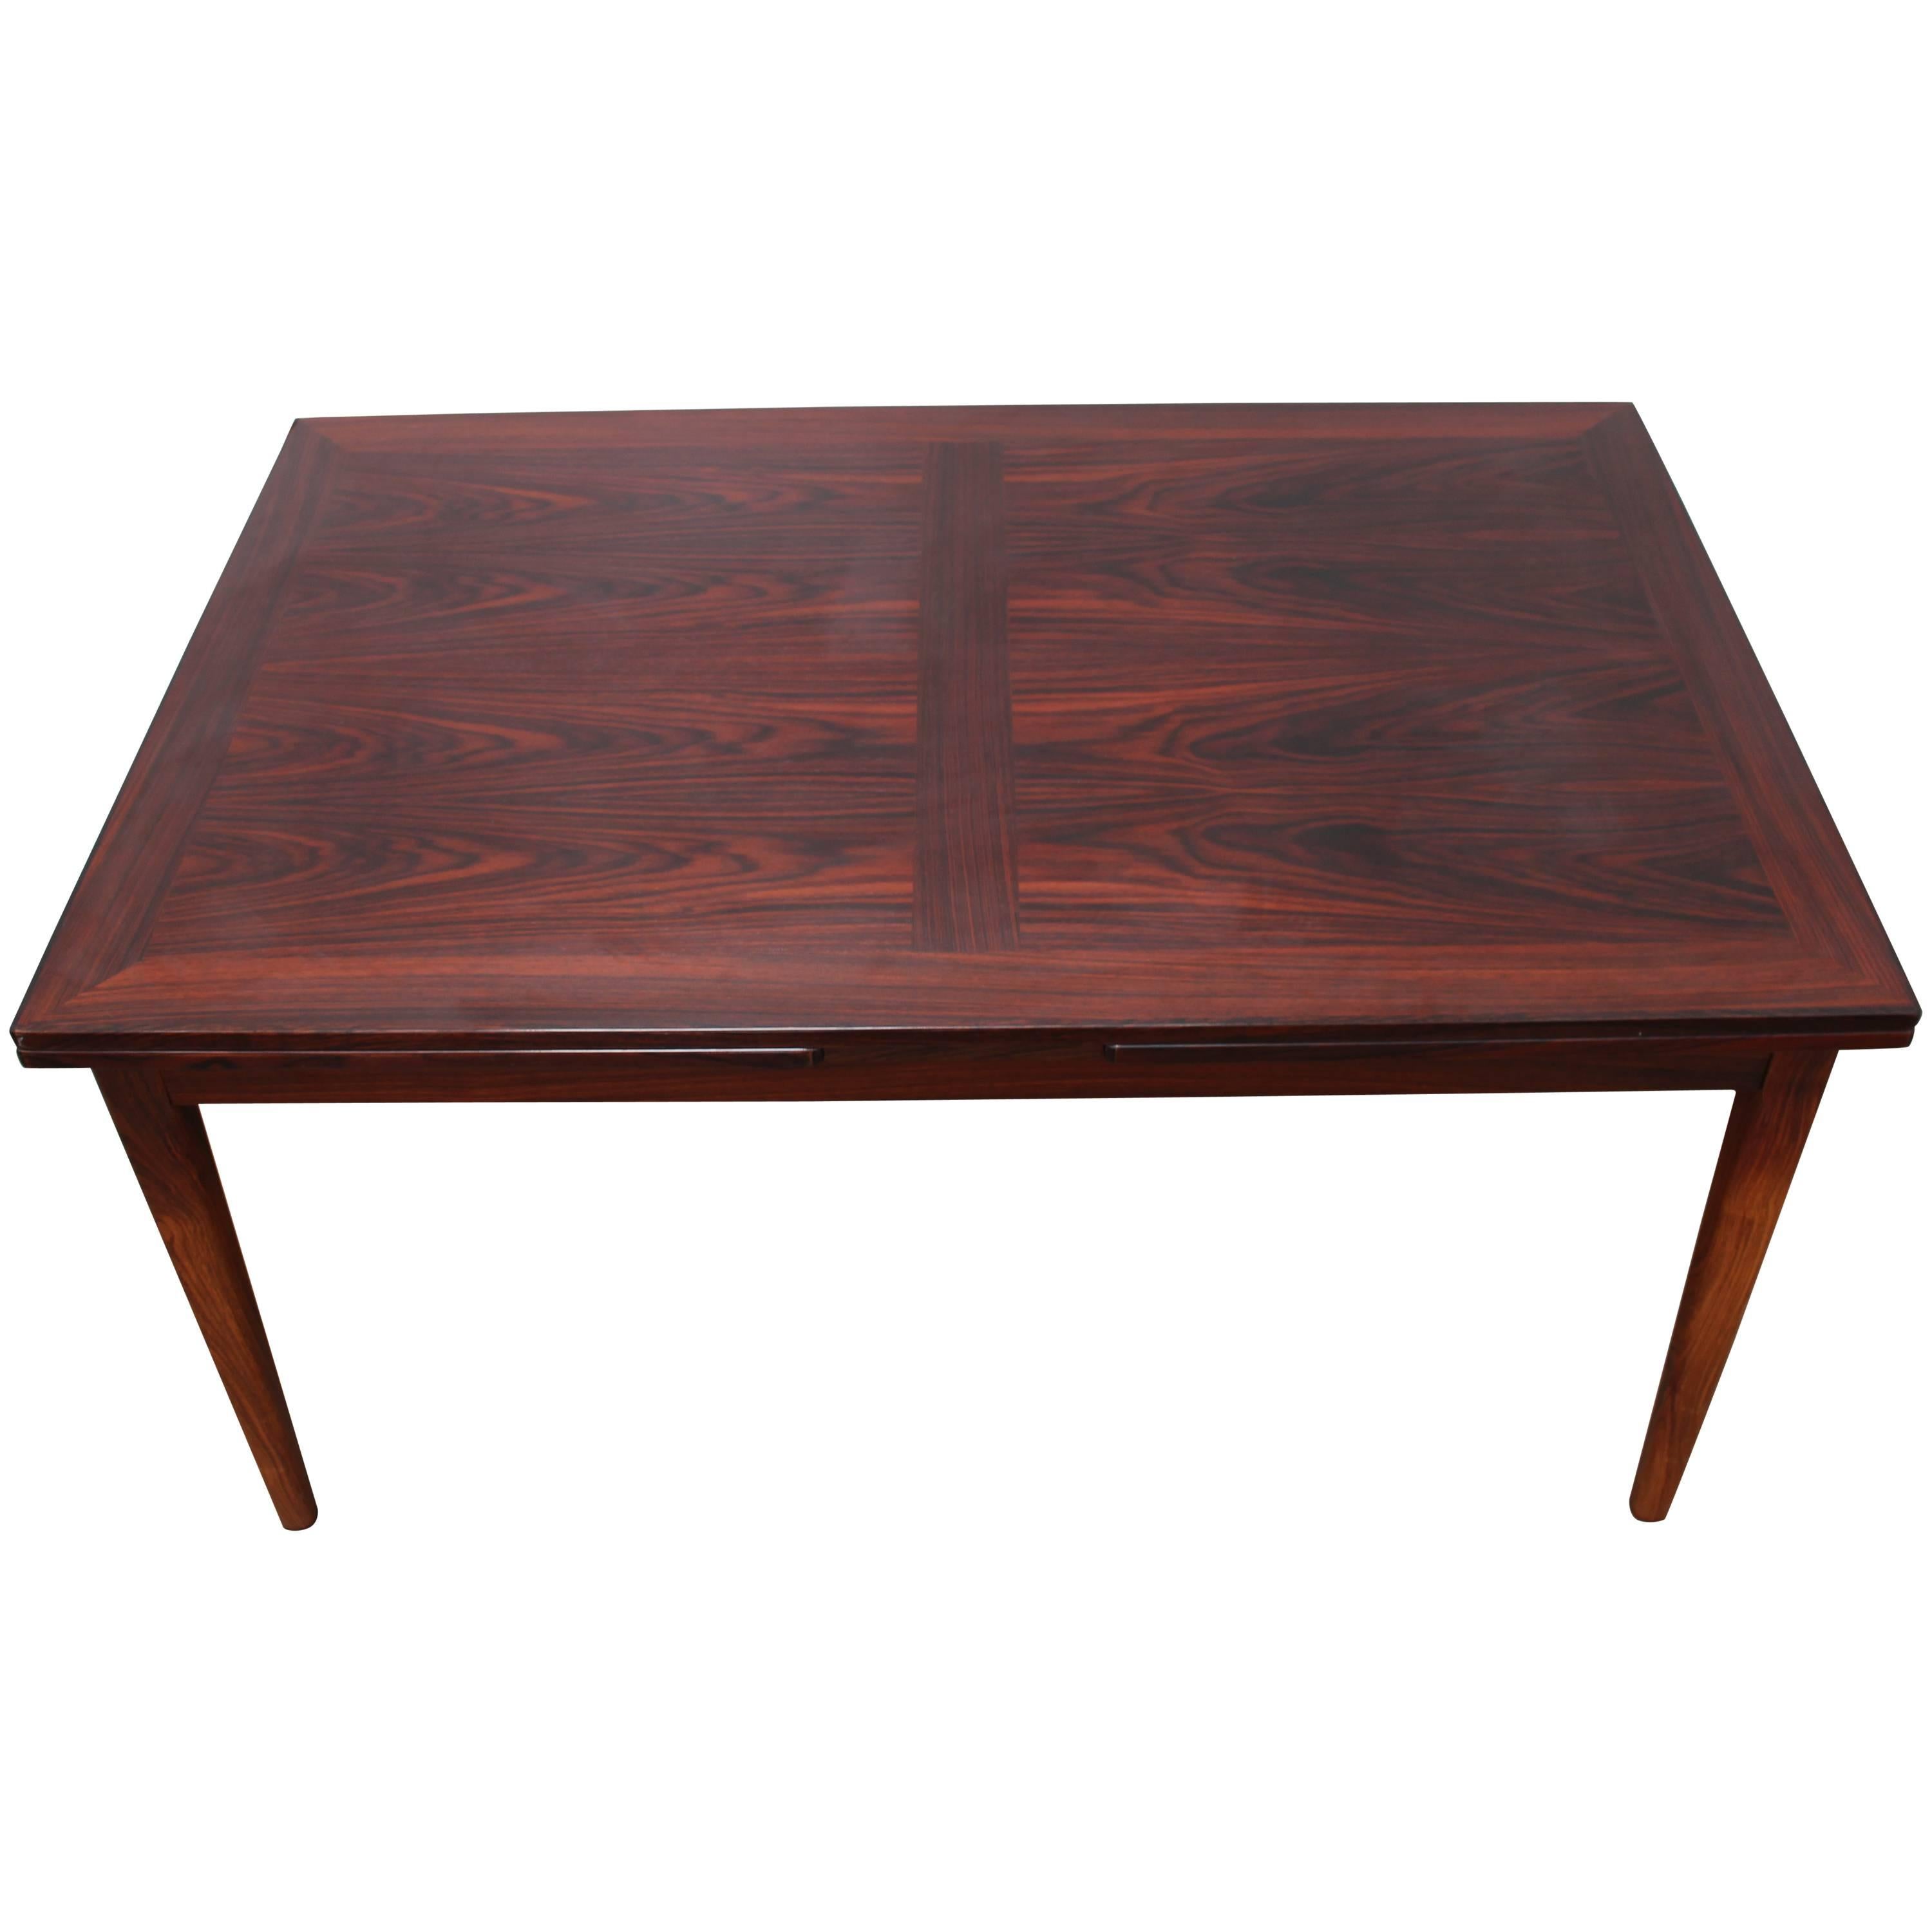 Scandinavian Modern Rosewood Dining Table or Desk with Self-Storing Leaves For Sale